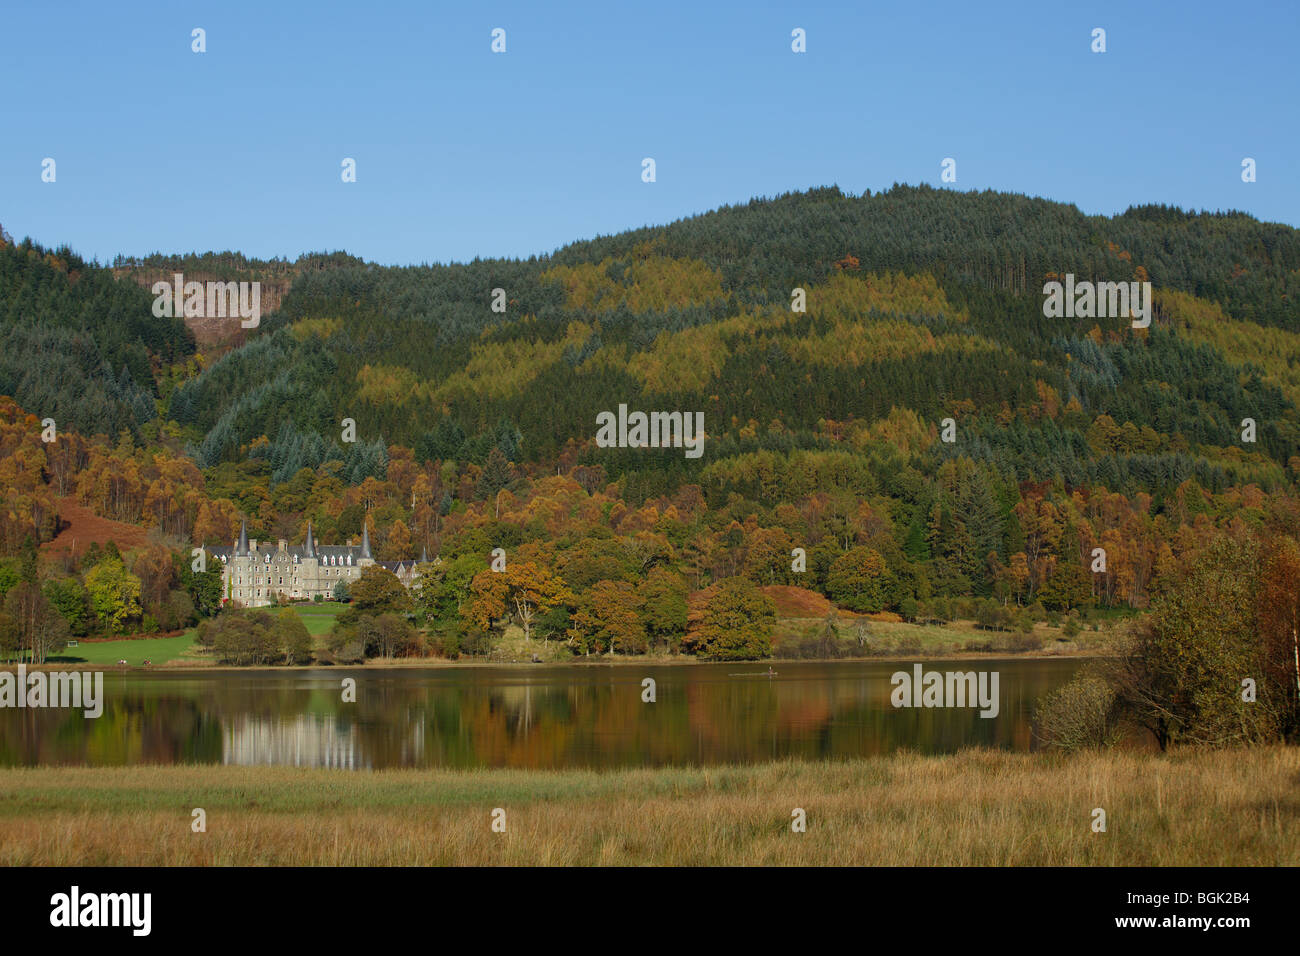 Tigh Mor Holiday Homes, formerly Trossachs Hotel, on Loch Achray in Autumn, Loch Lomond and Trossachs National Park, Stirling, Scotland, UK Stock Photo